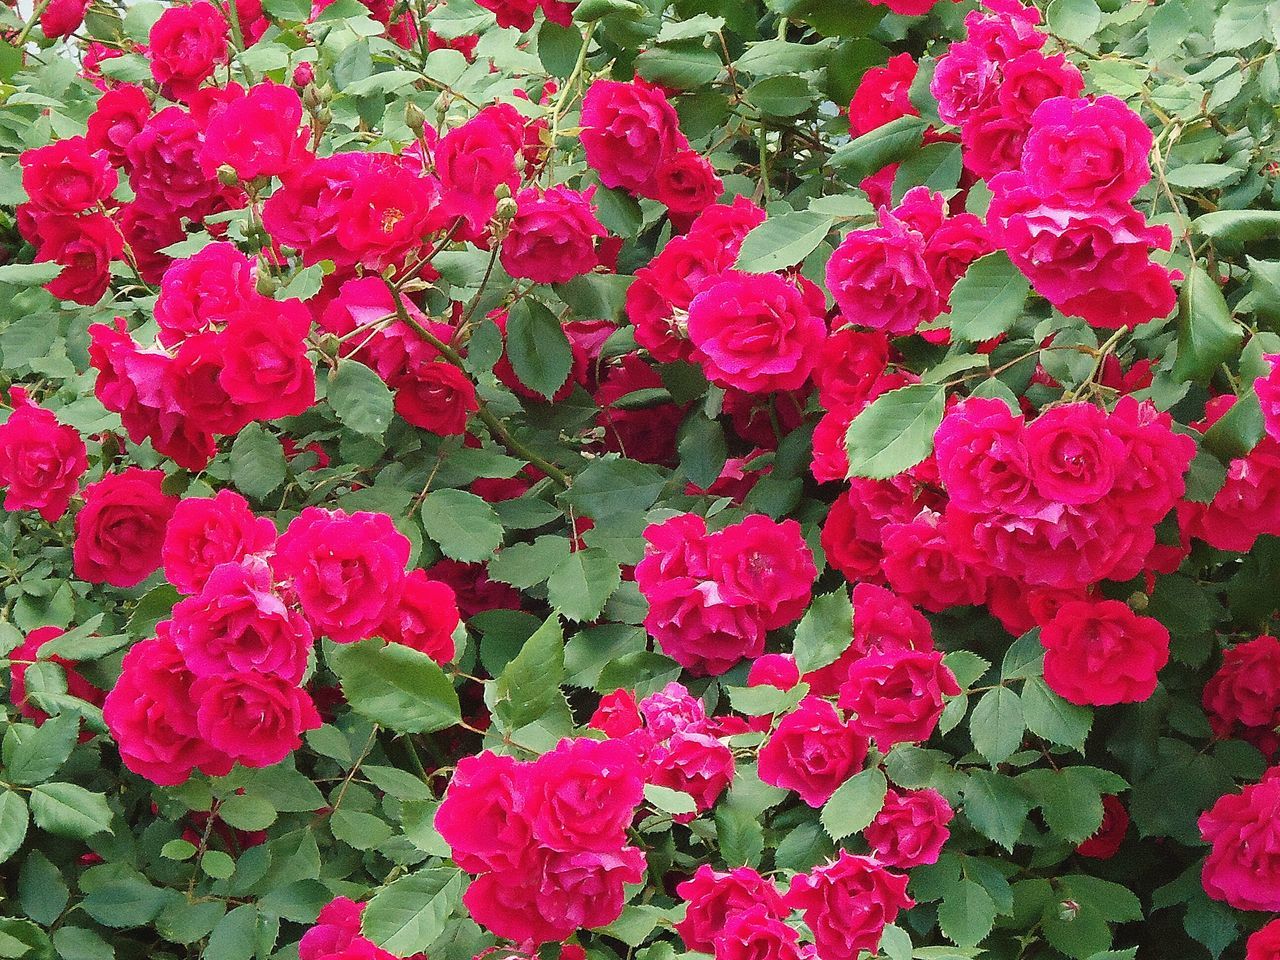 Red roses blooming in garden